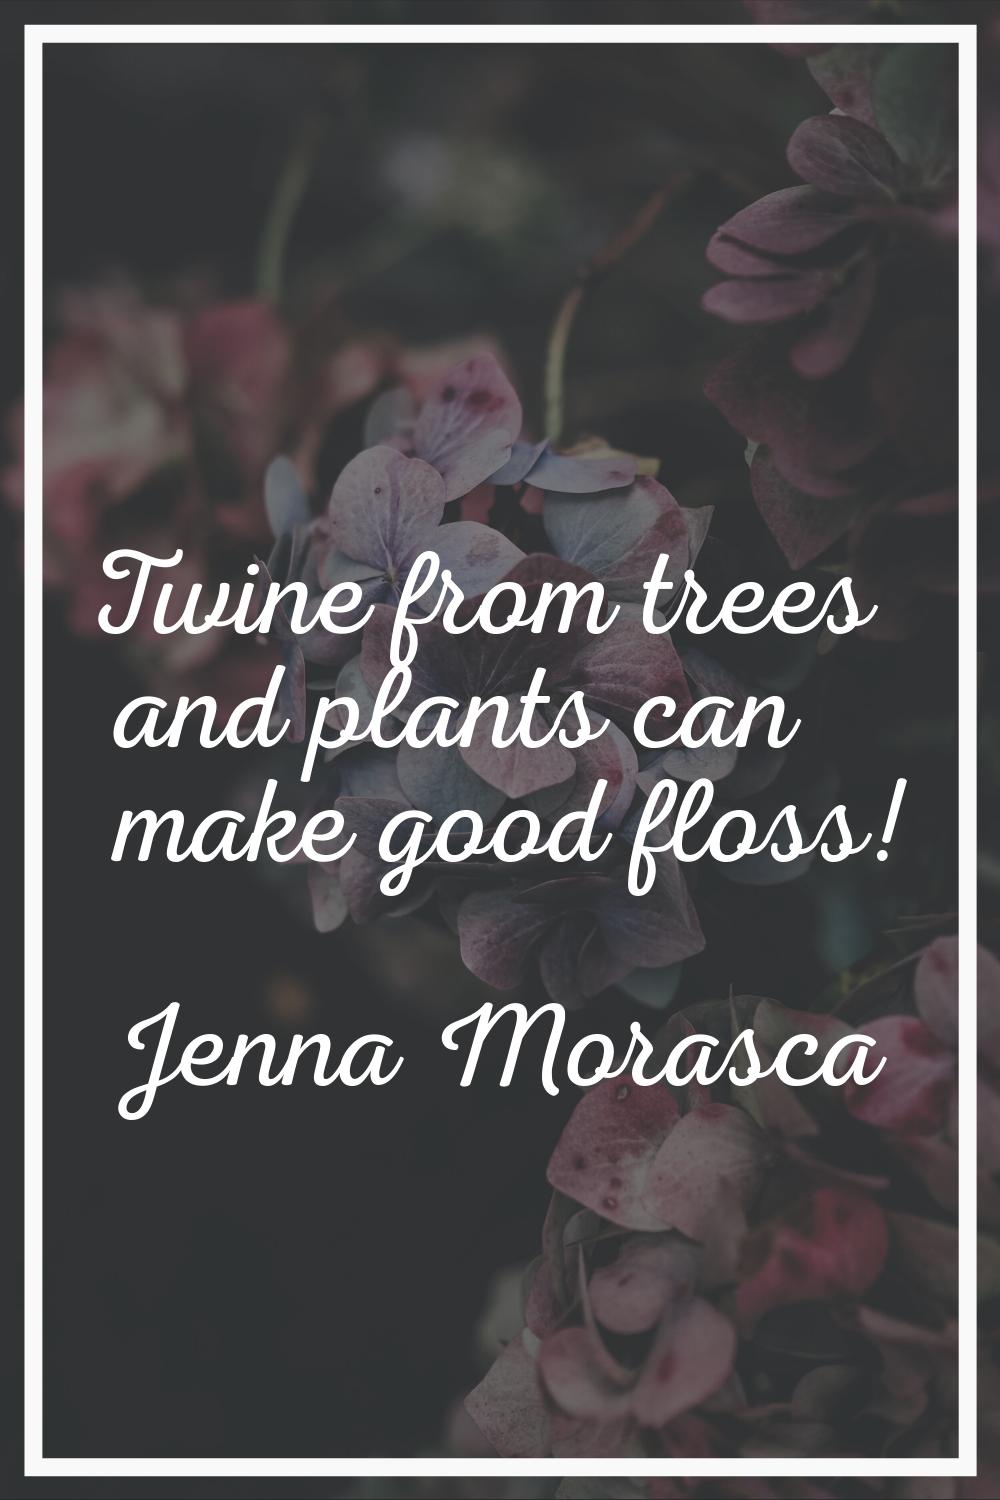 Twine from trees and plants can make good floss!